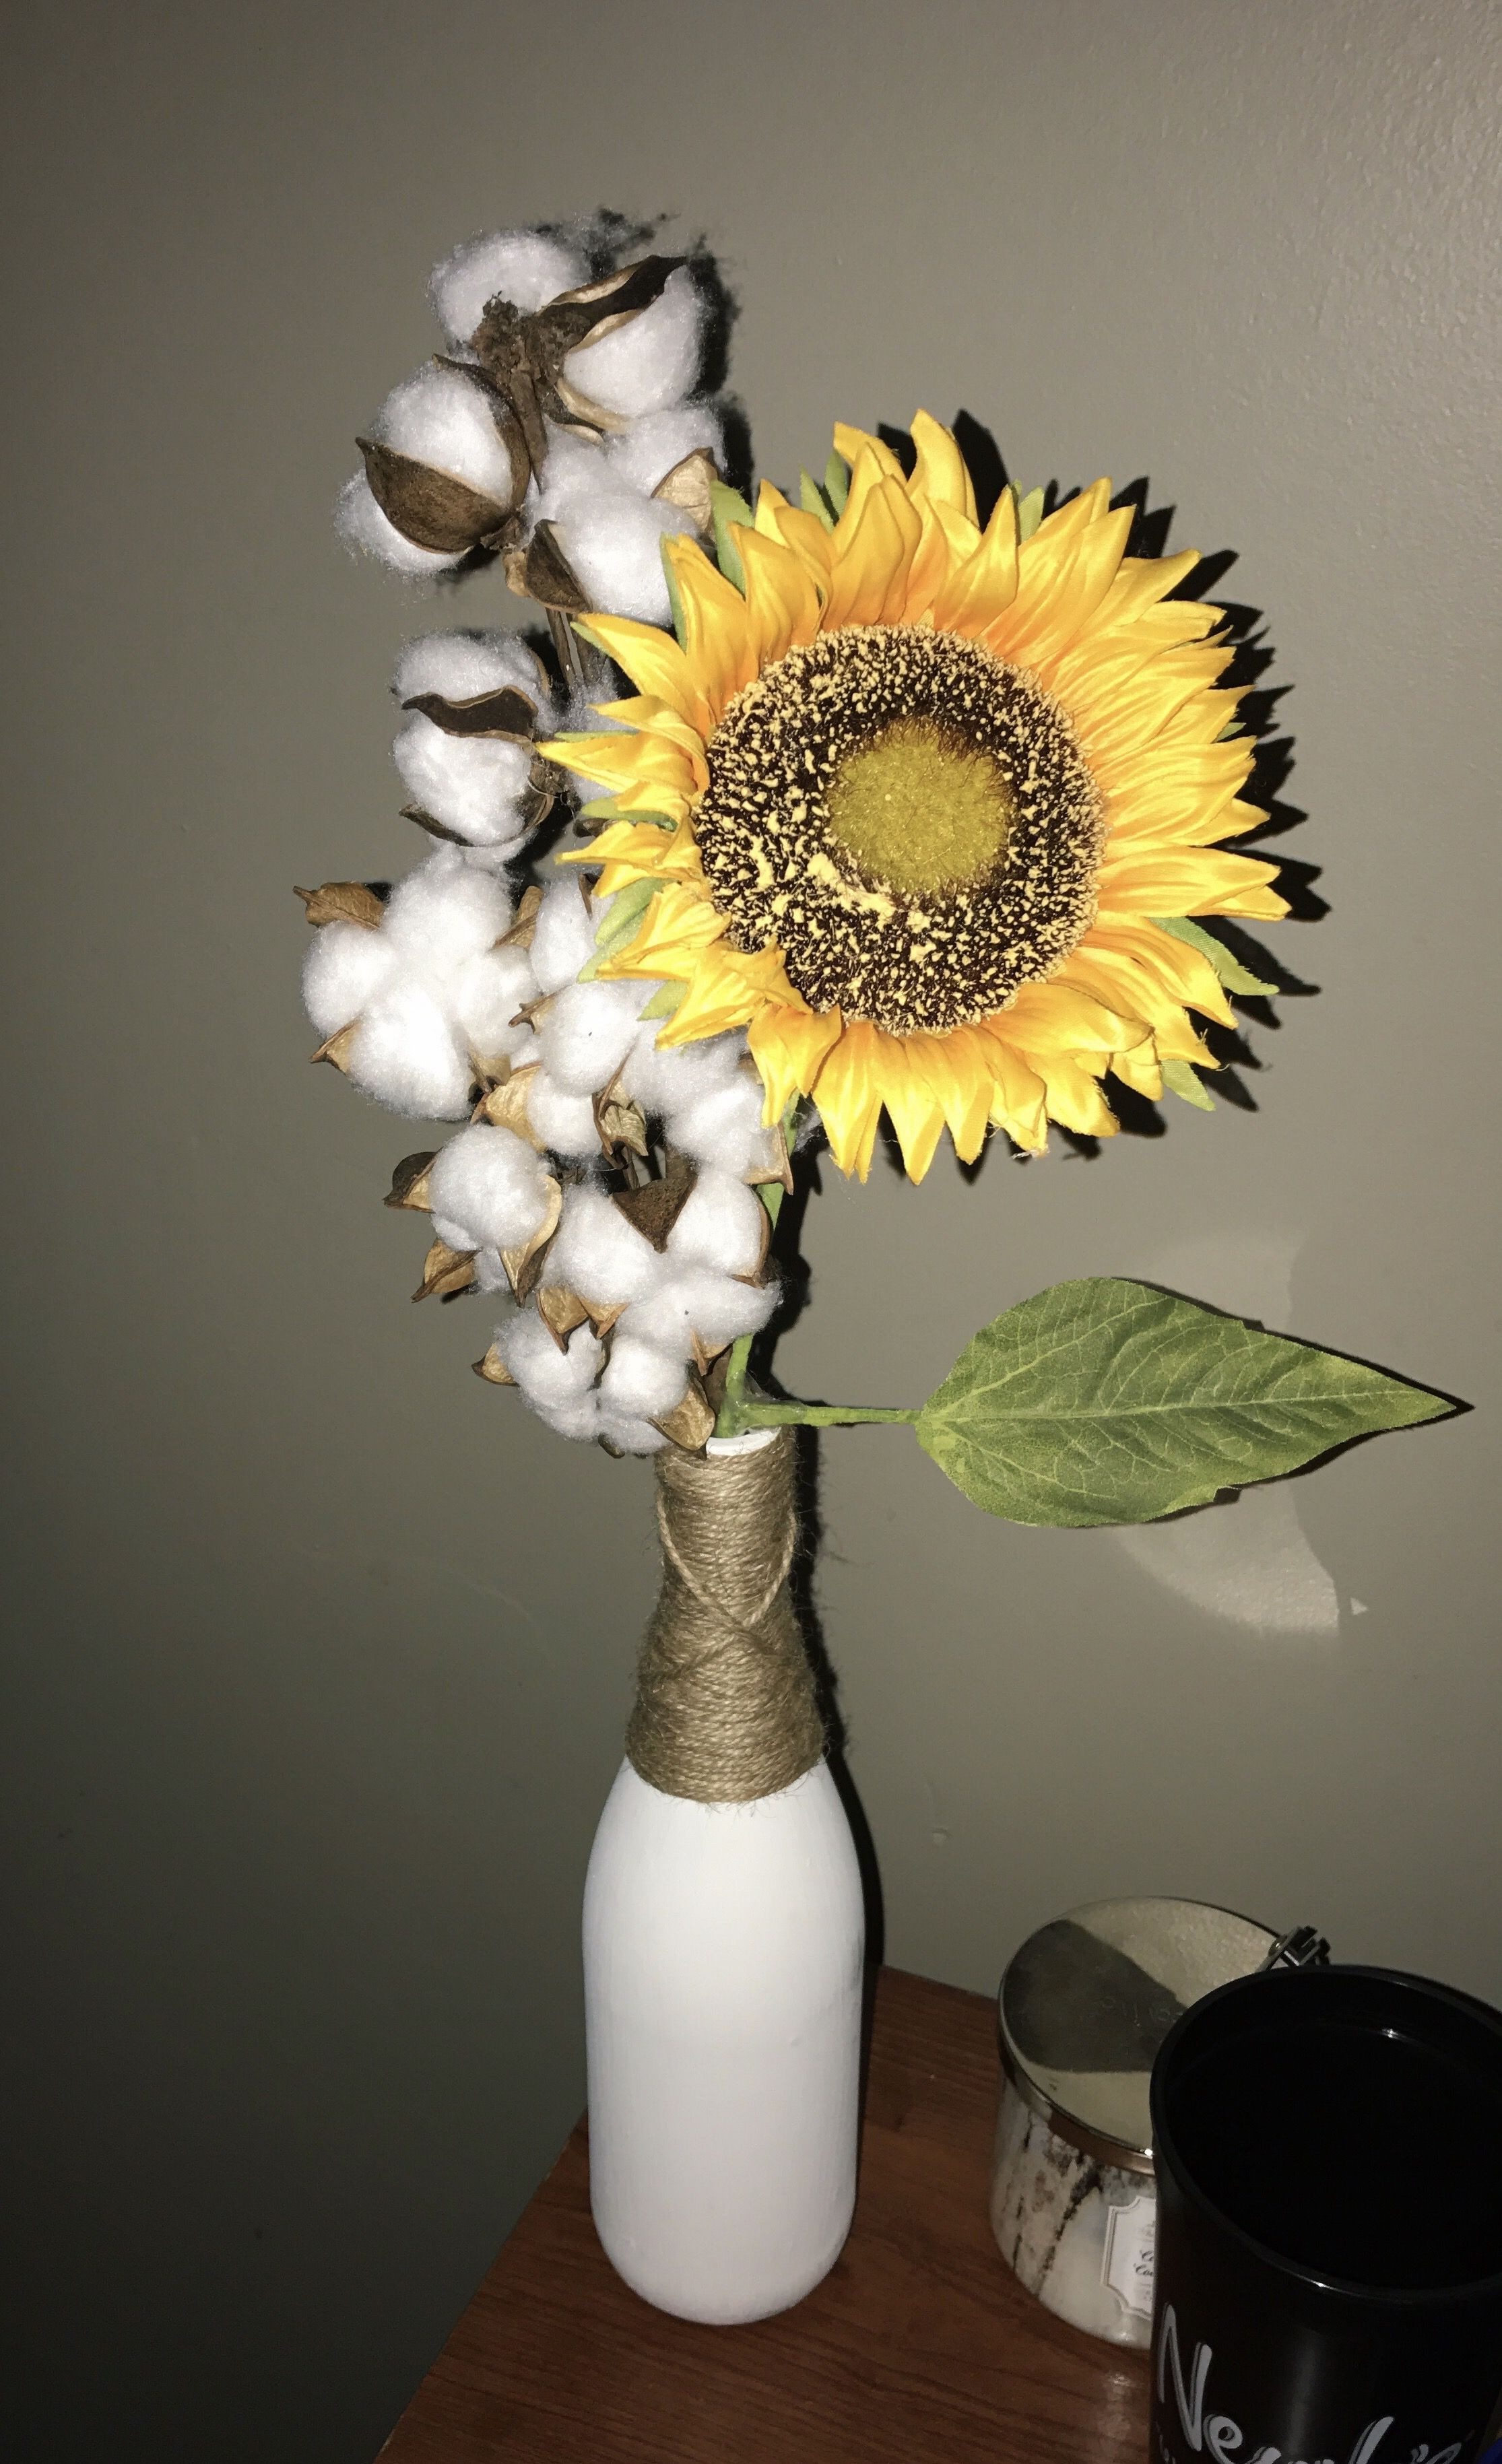 22 Lovable Cotton In Vase 2024 free download cotton in vase of sunflower and cotton arrangement in wine bottle our next home regarding sunflower and cotton arrangement in wine bottle